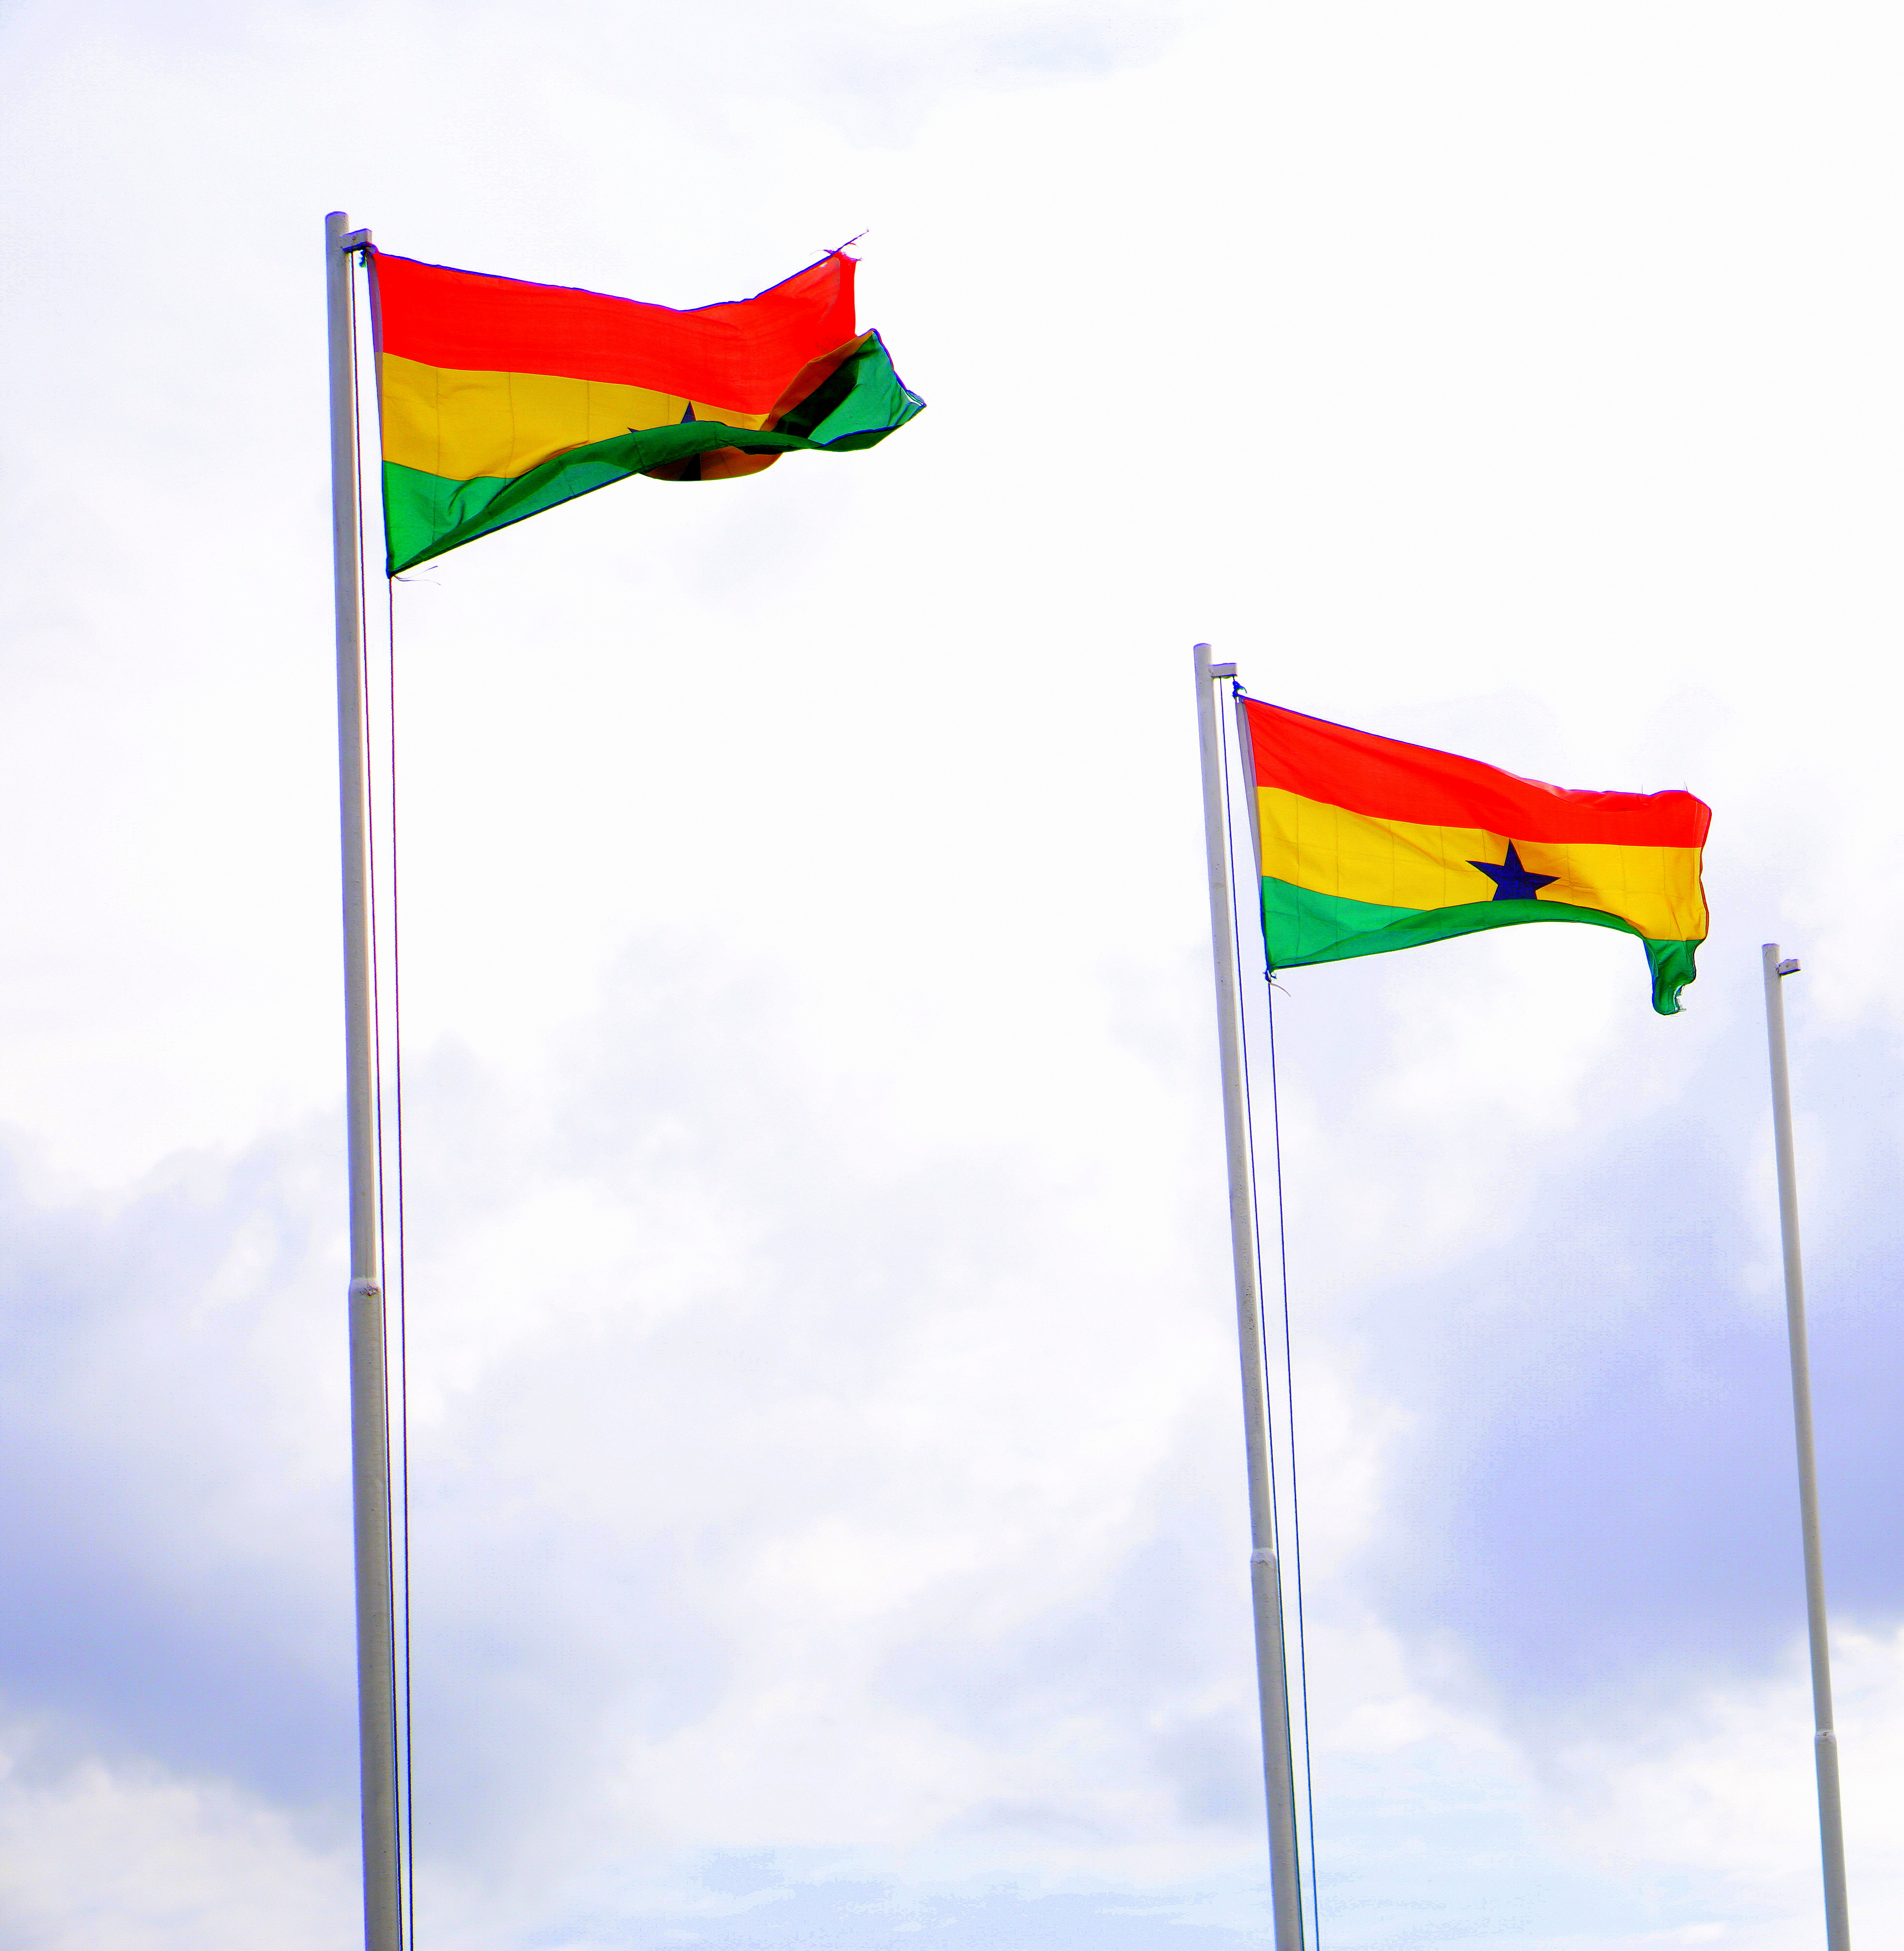 Picture of the Ghana flag on my road trip from Lagos to ghana by road